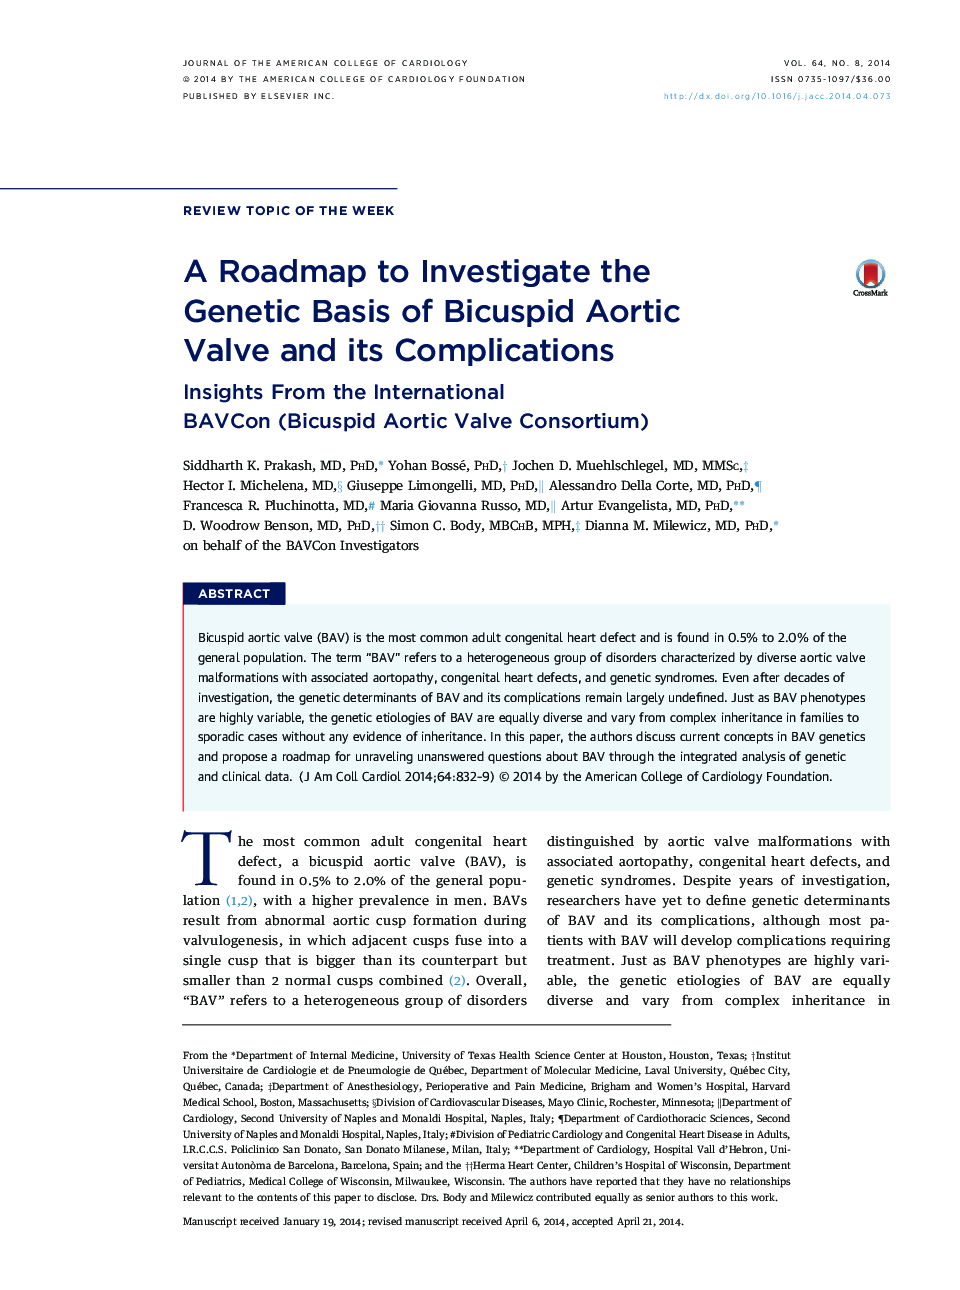 A Roadmap to Investigate the Genetic Basis of Bicuspid Aortic Valve and its Complications : Insights From the International BAVCon (Bicuspid Aortic Valve Consortium)